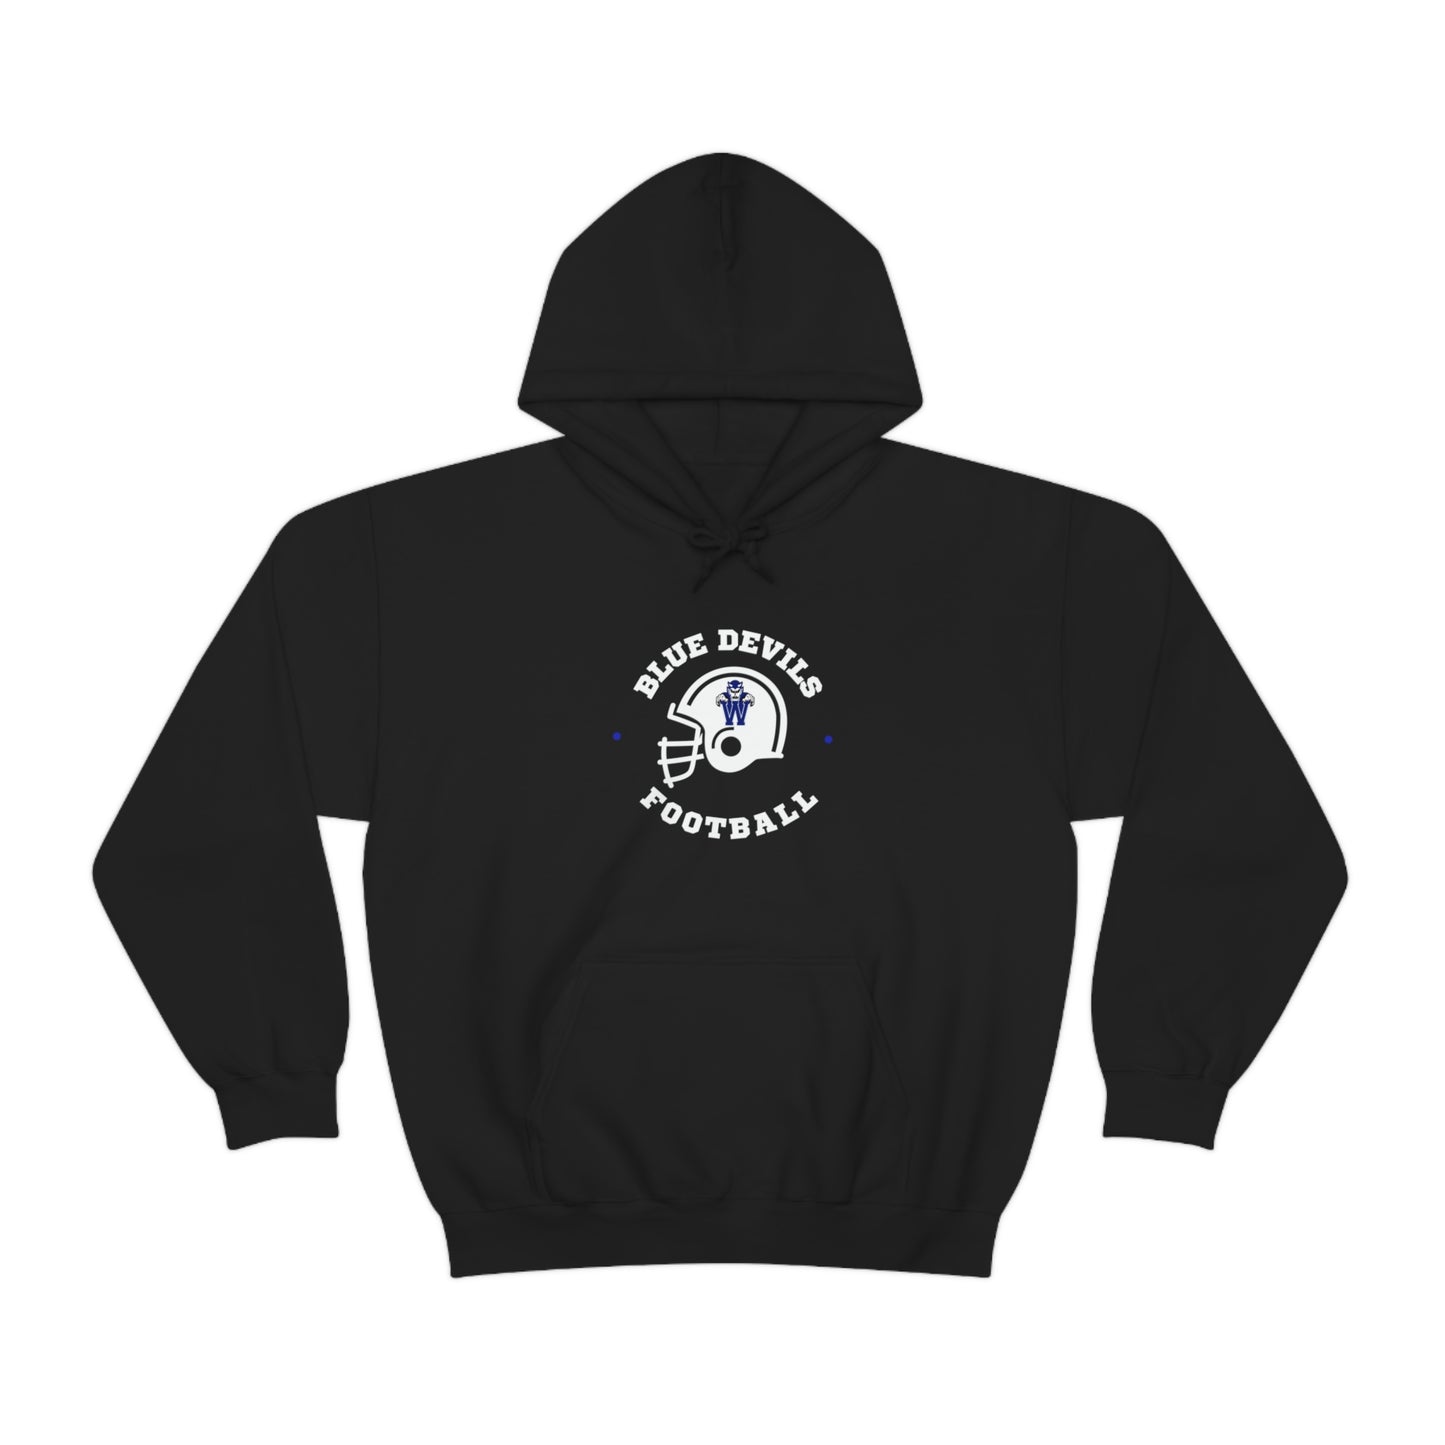 Football Hoodie Personalized with Name [Design 2]